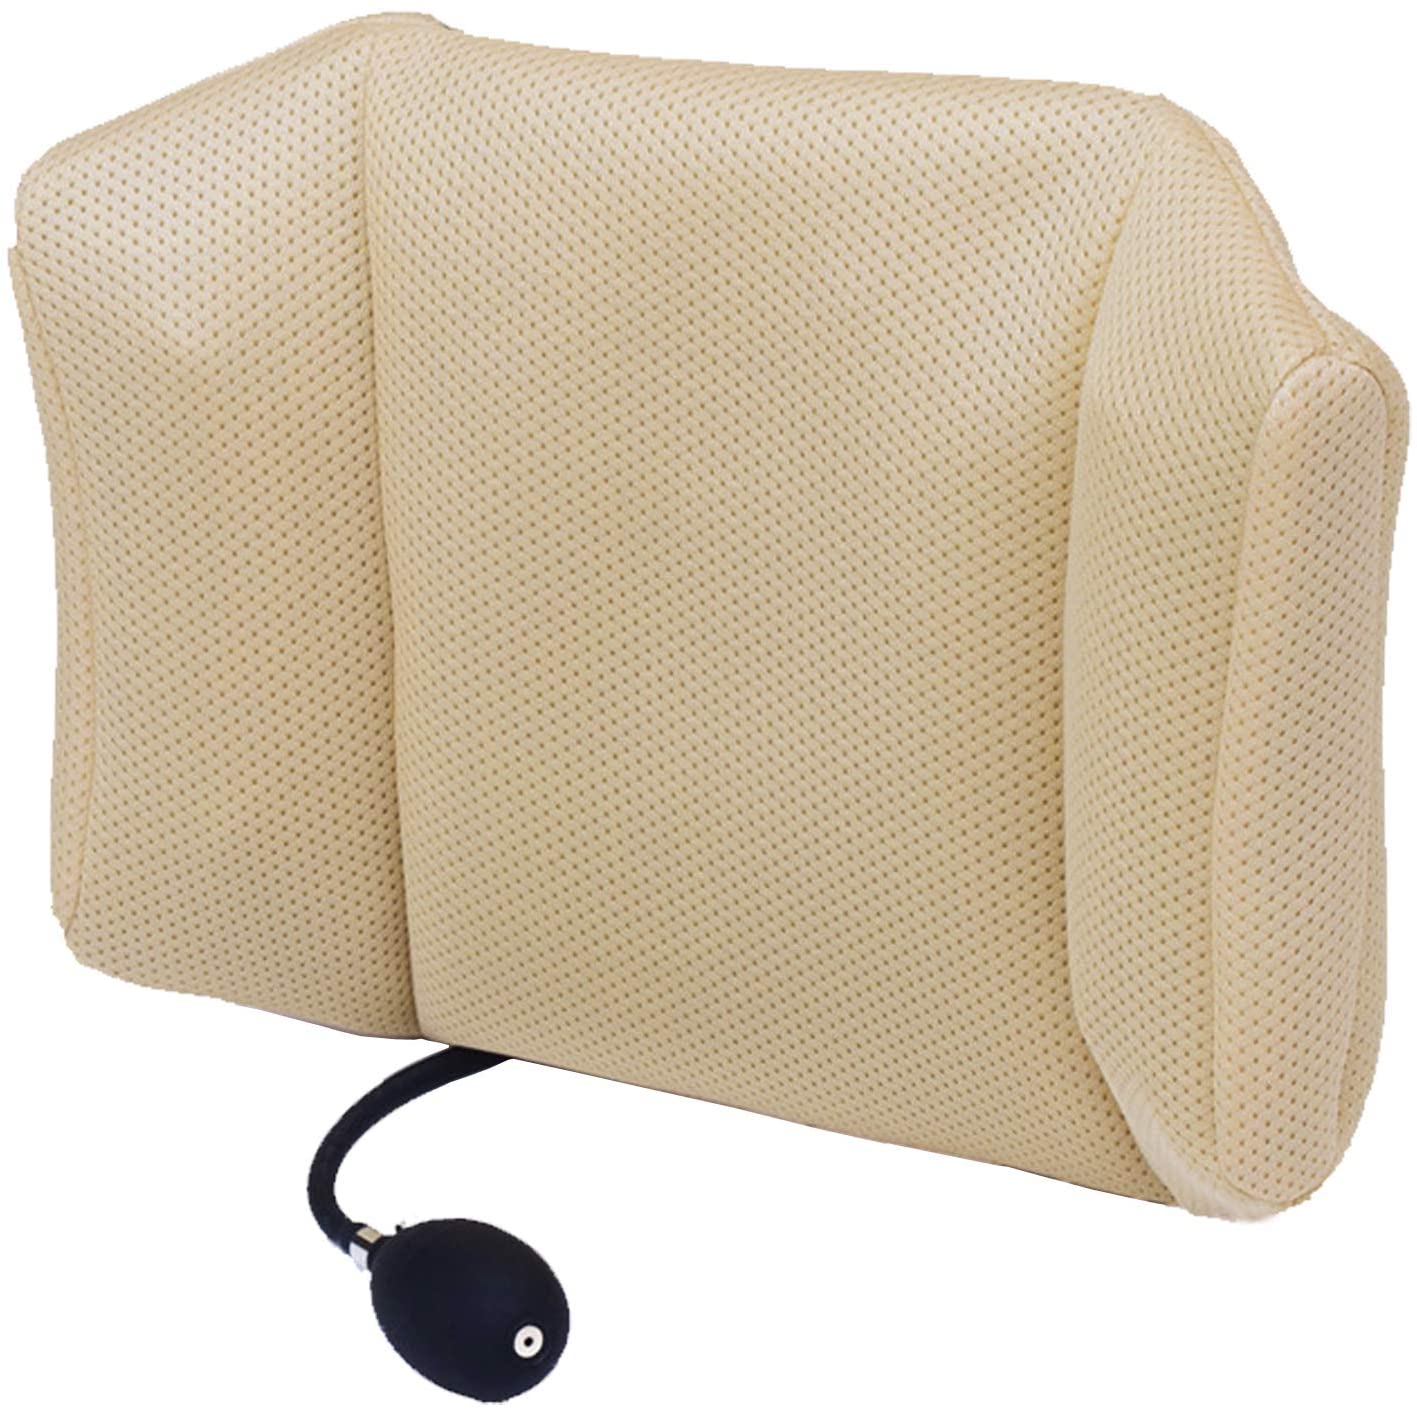 A0662-Tcare Portable Inflatable Lumbar Support Cushion/Massage Pillows–